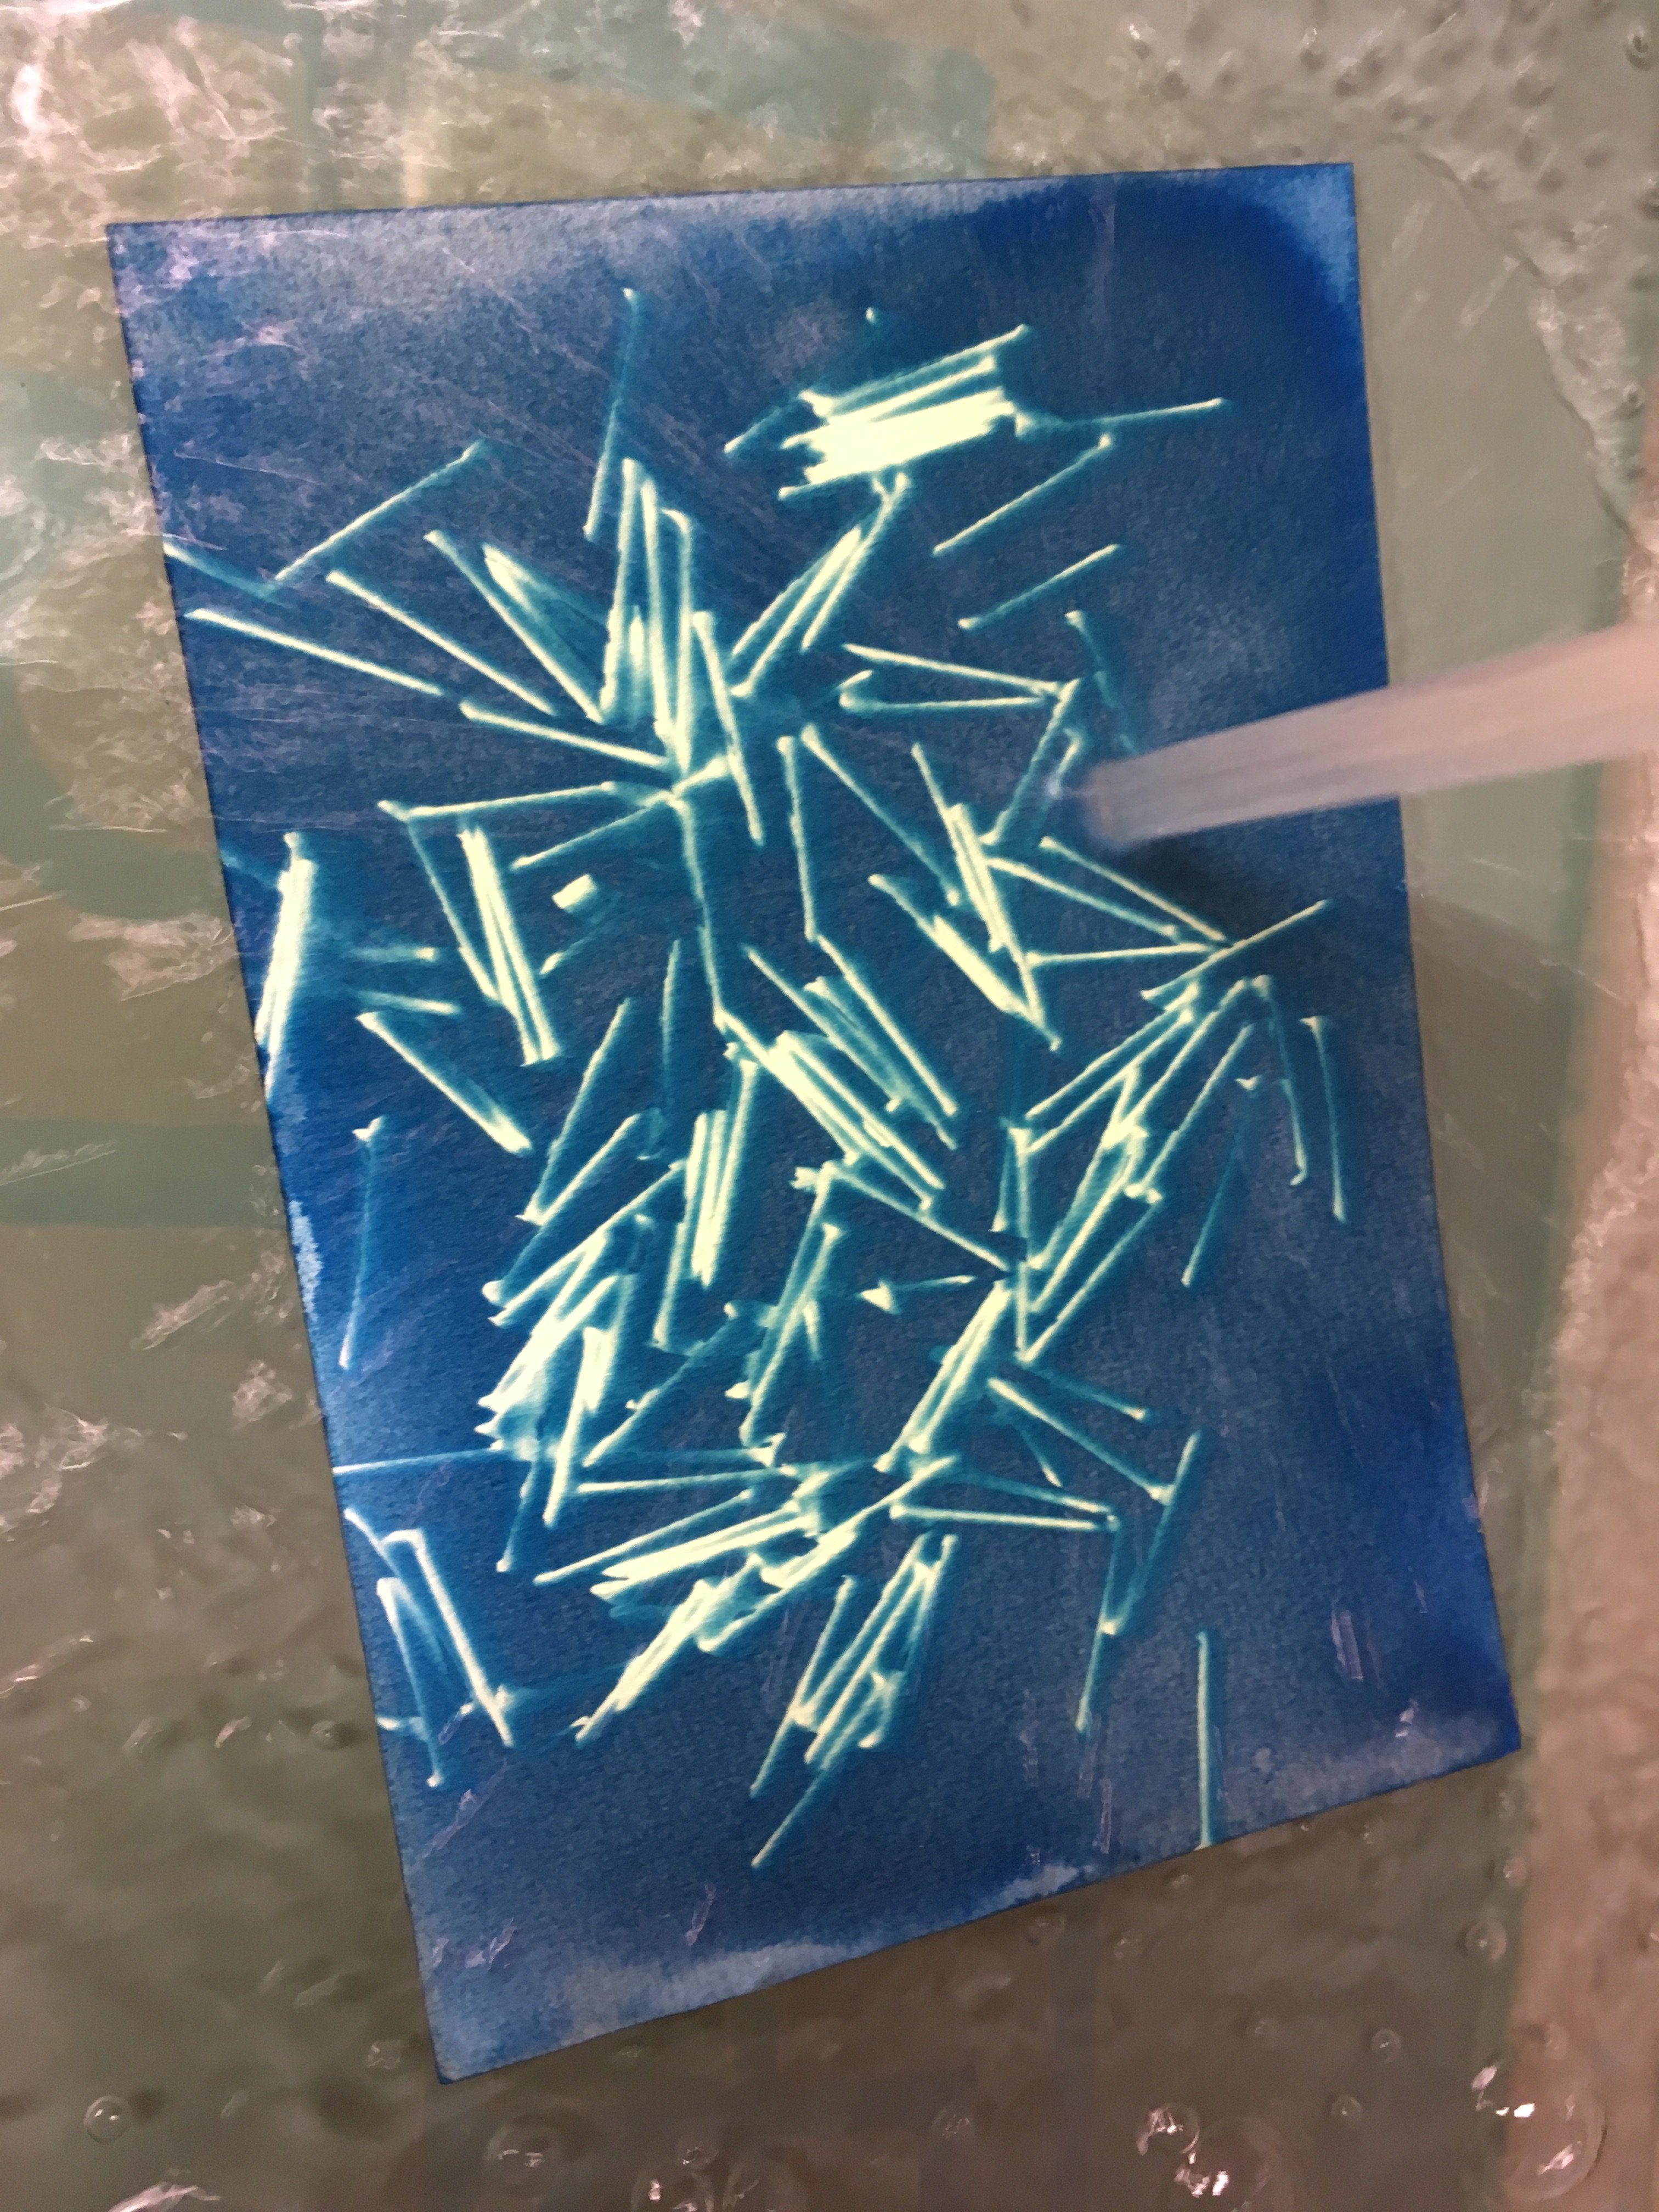 Artful Cyanotypes - Photograms, toning and double exposures